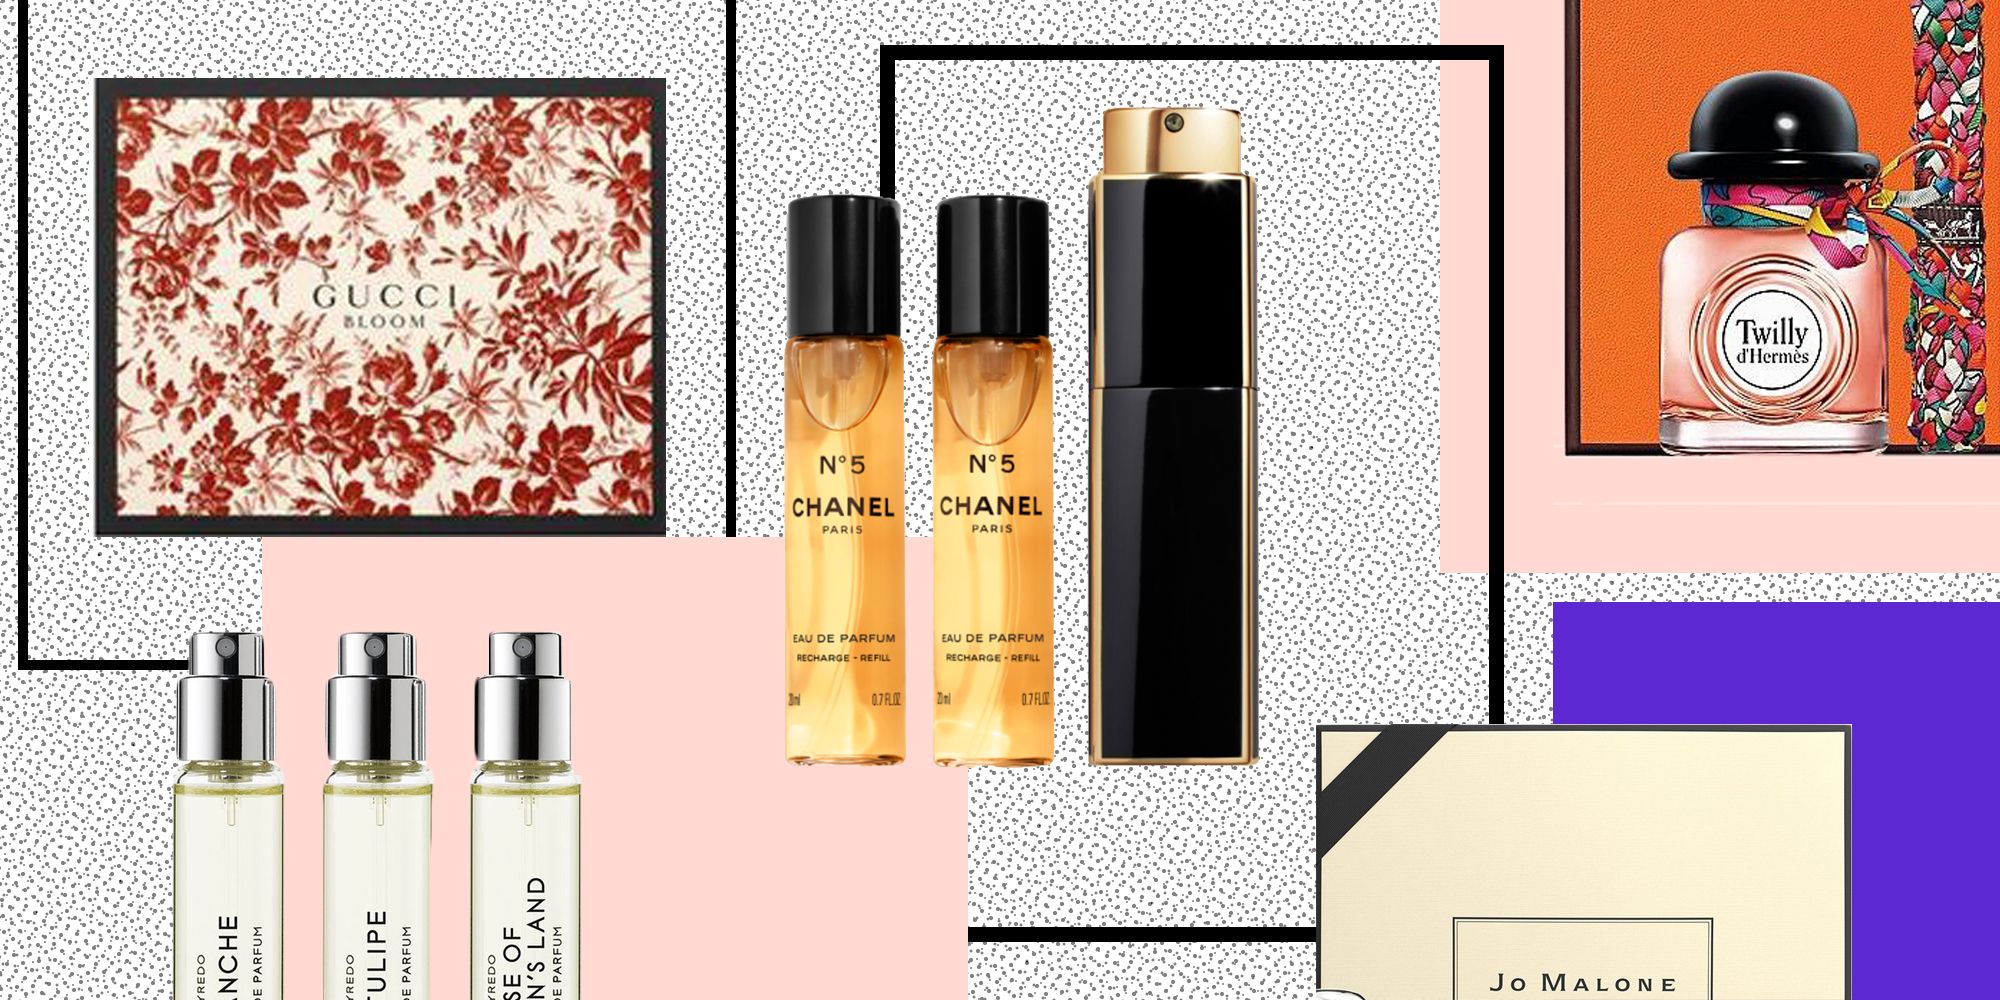 10 Best Perfume Gift Sets | Top 